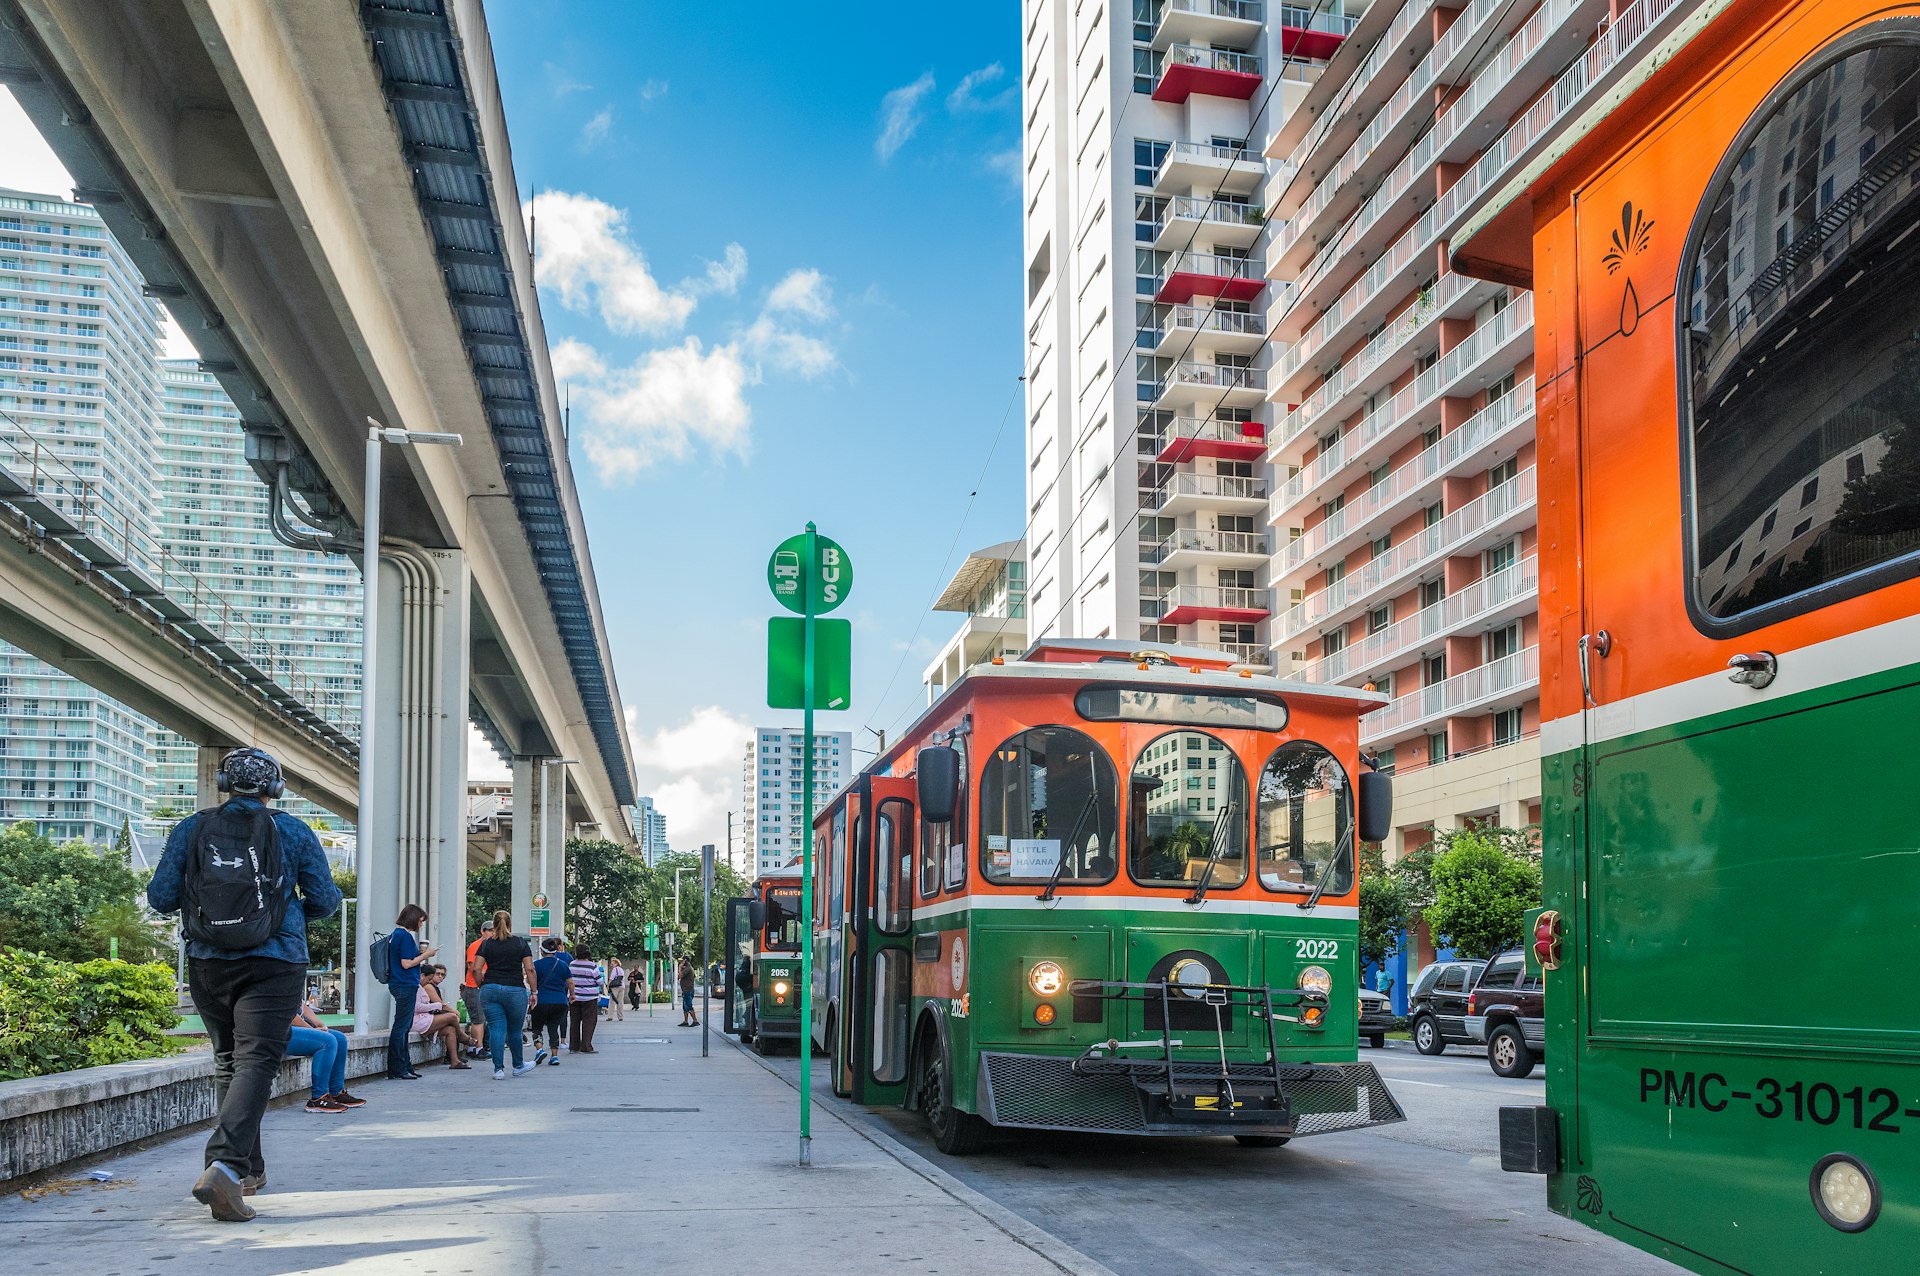 Orange-and-green trolley buses are waiting to pick up passengers at Brickell Trolley Bus Station in Miami